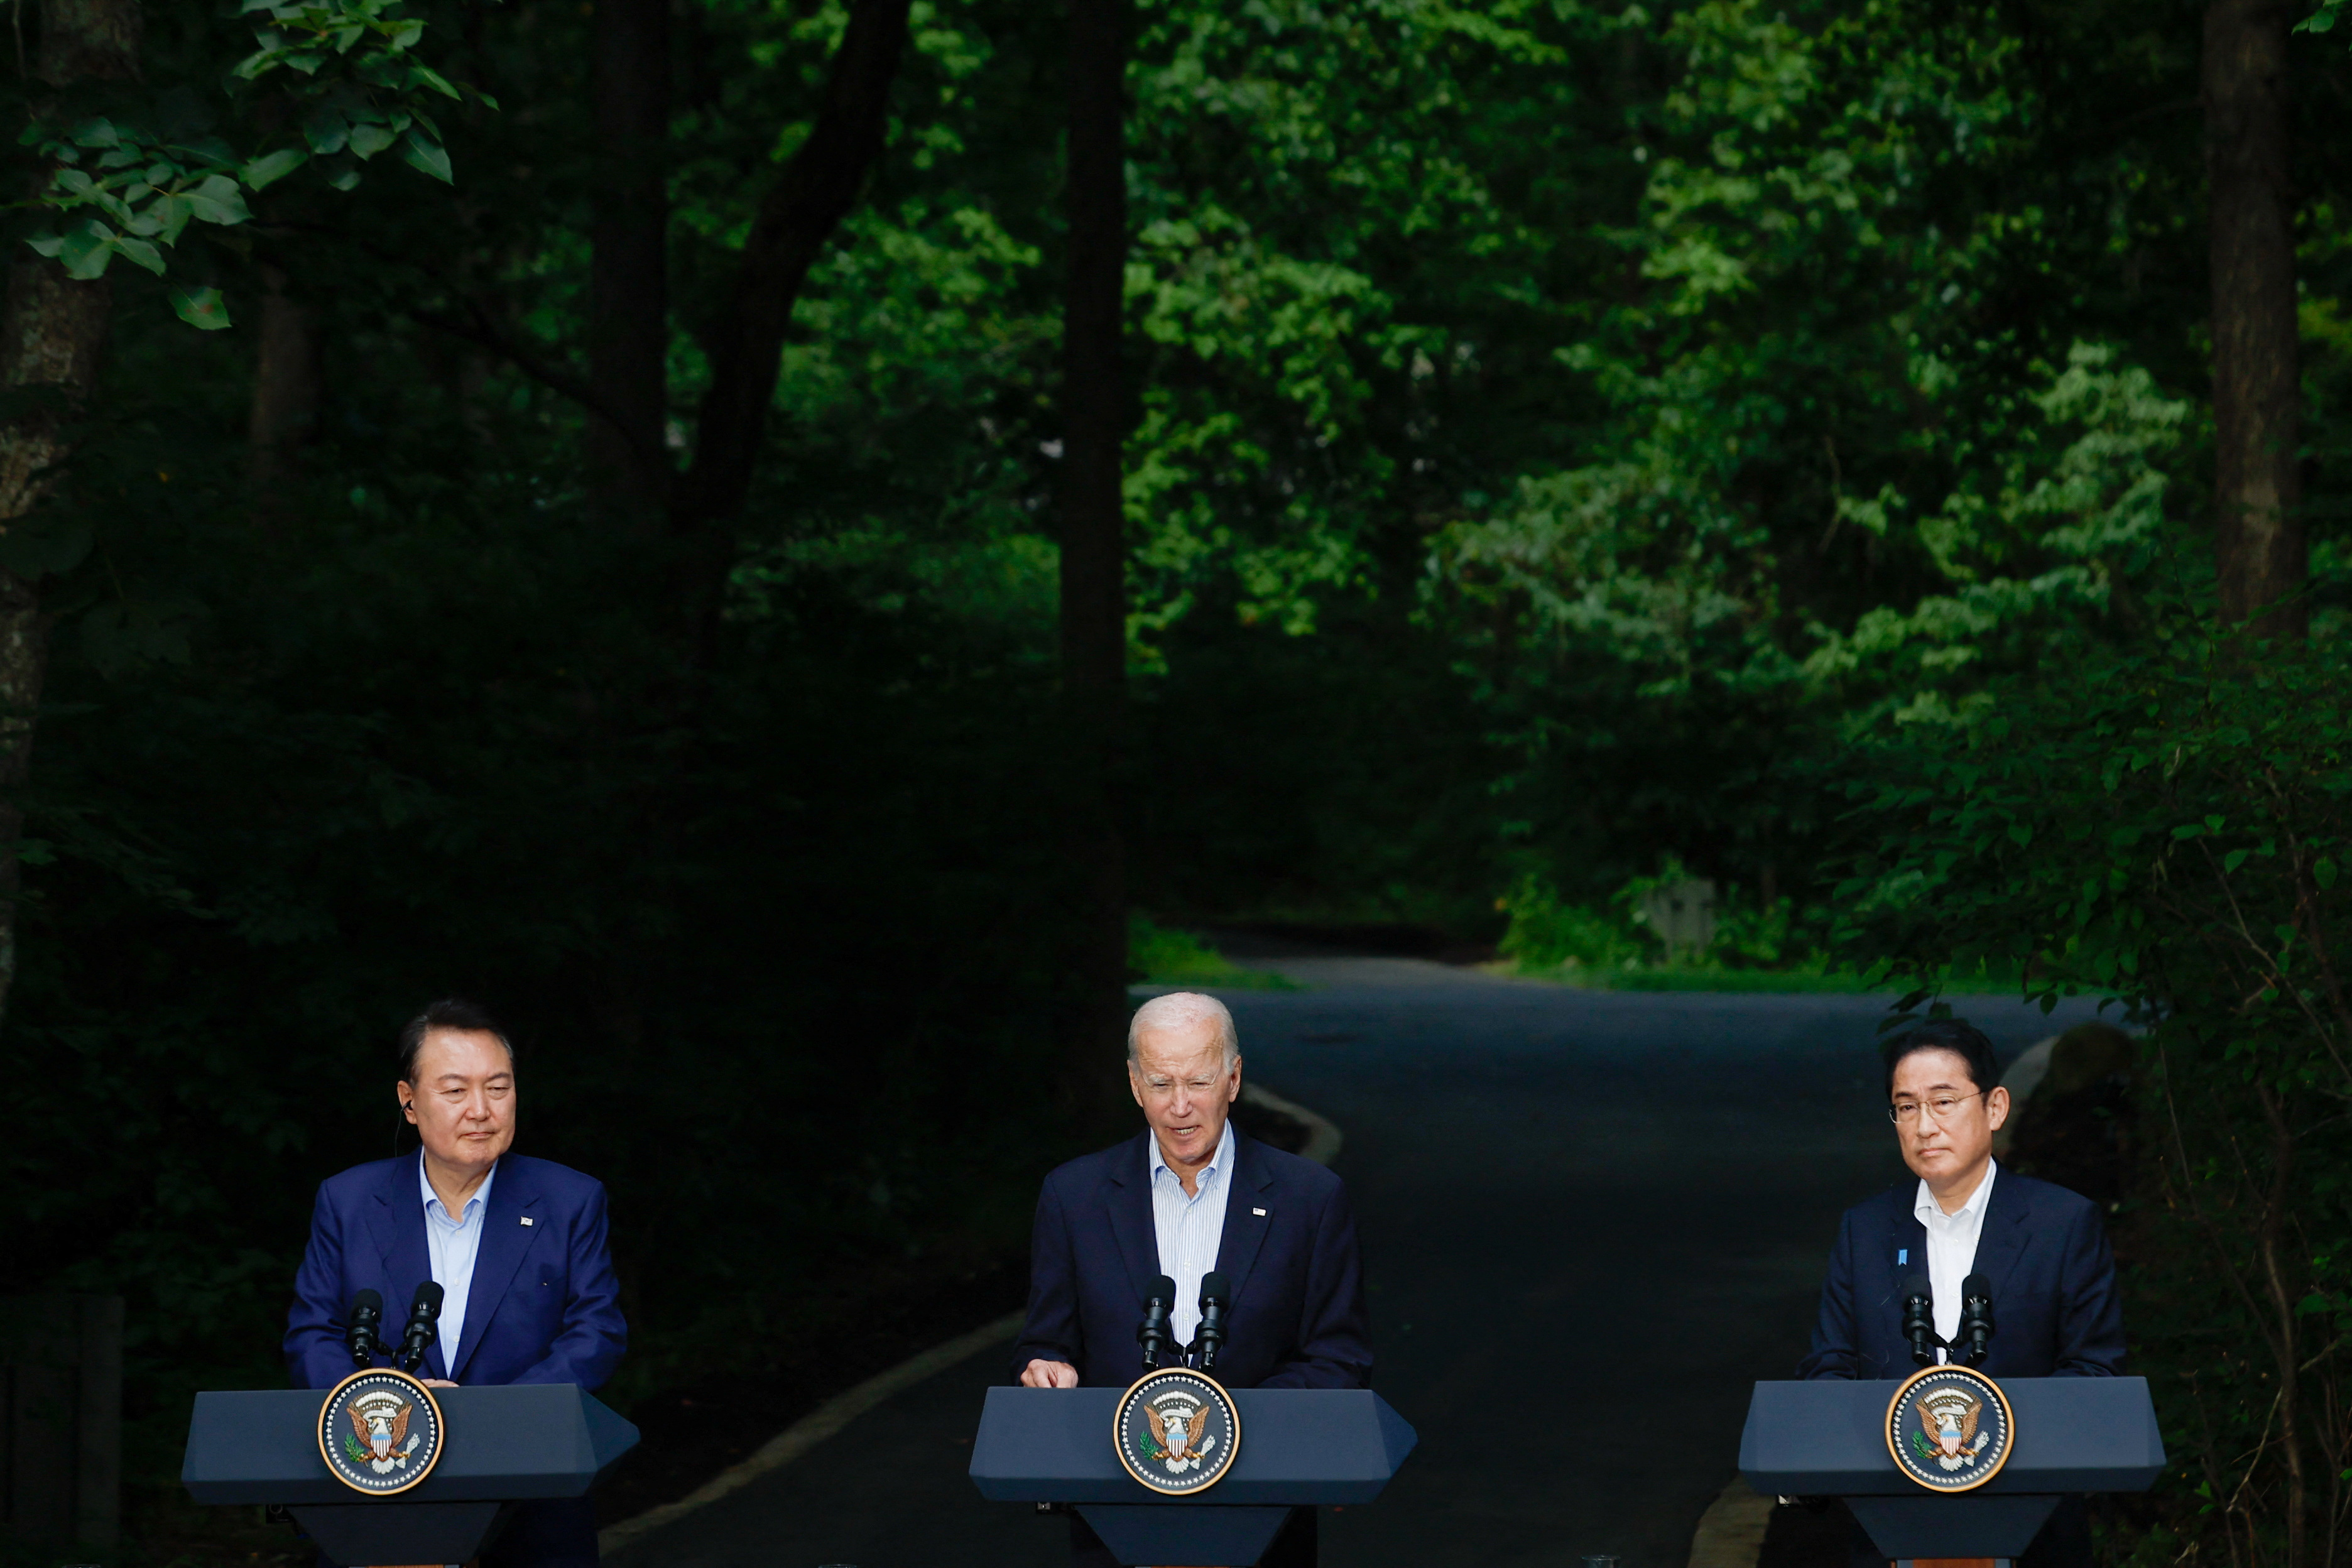 Trilateral summit at Camp David in Maryland